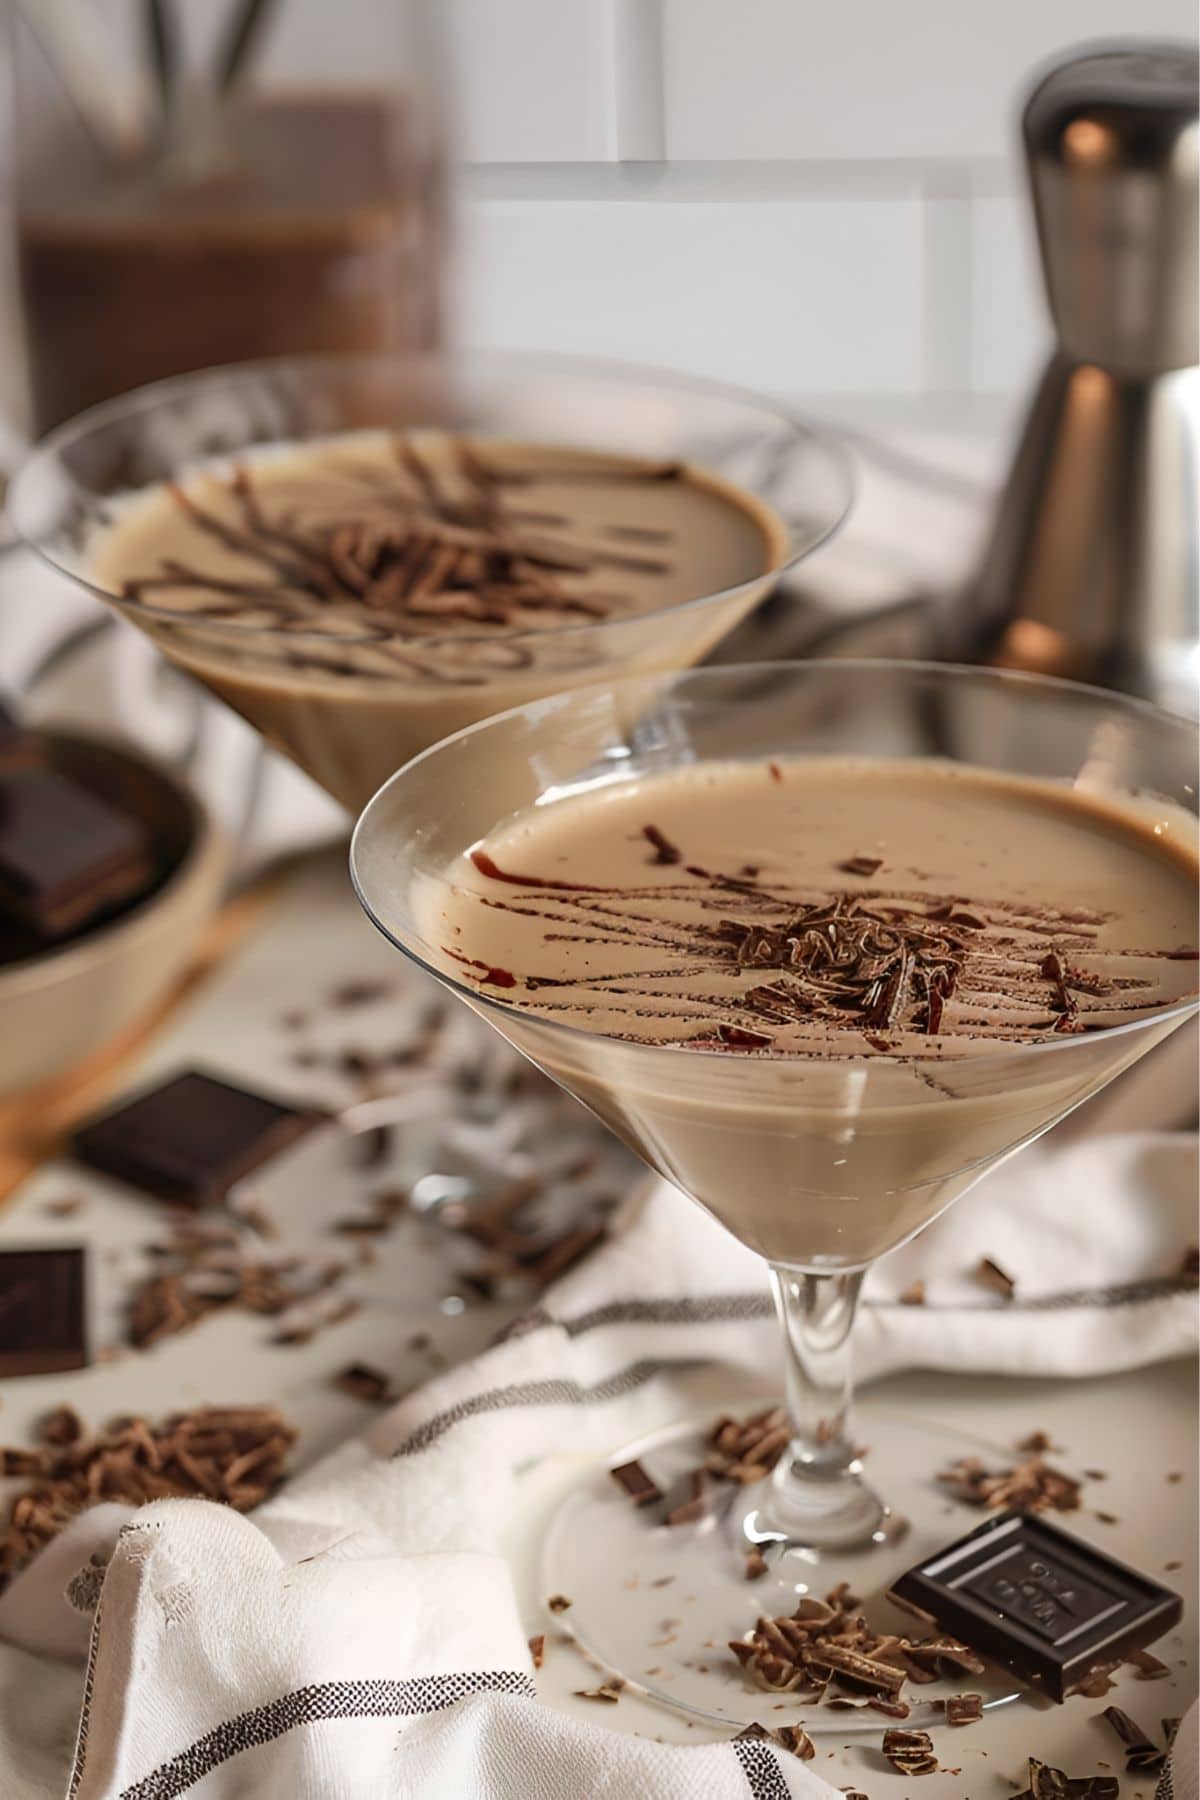 Two Godiva Chocolate Martinis with Chocolate Drizzle, Chocolate Shavings, and Chocolate Around the Table